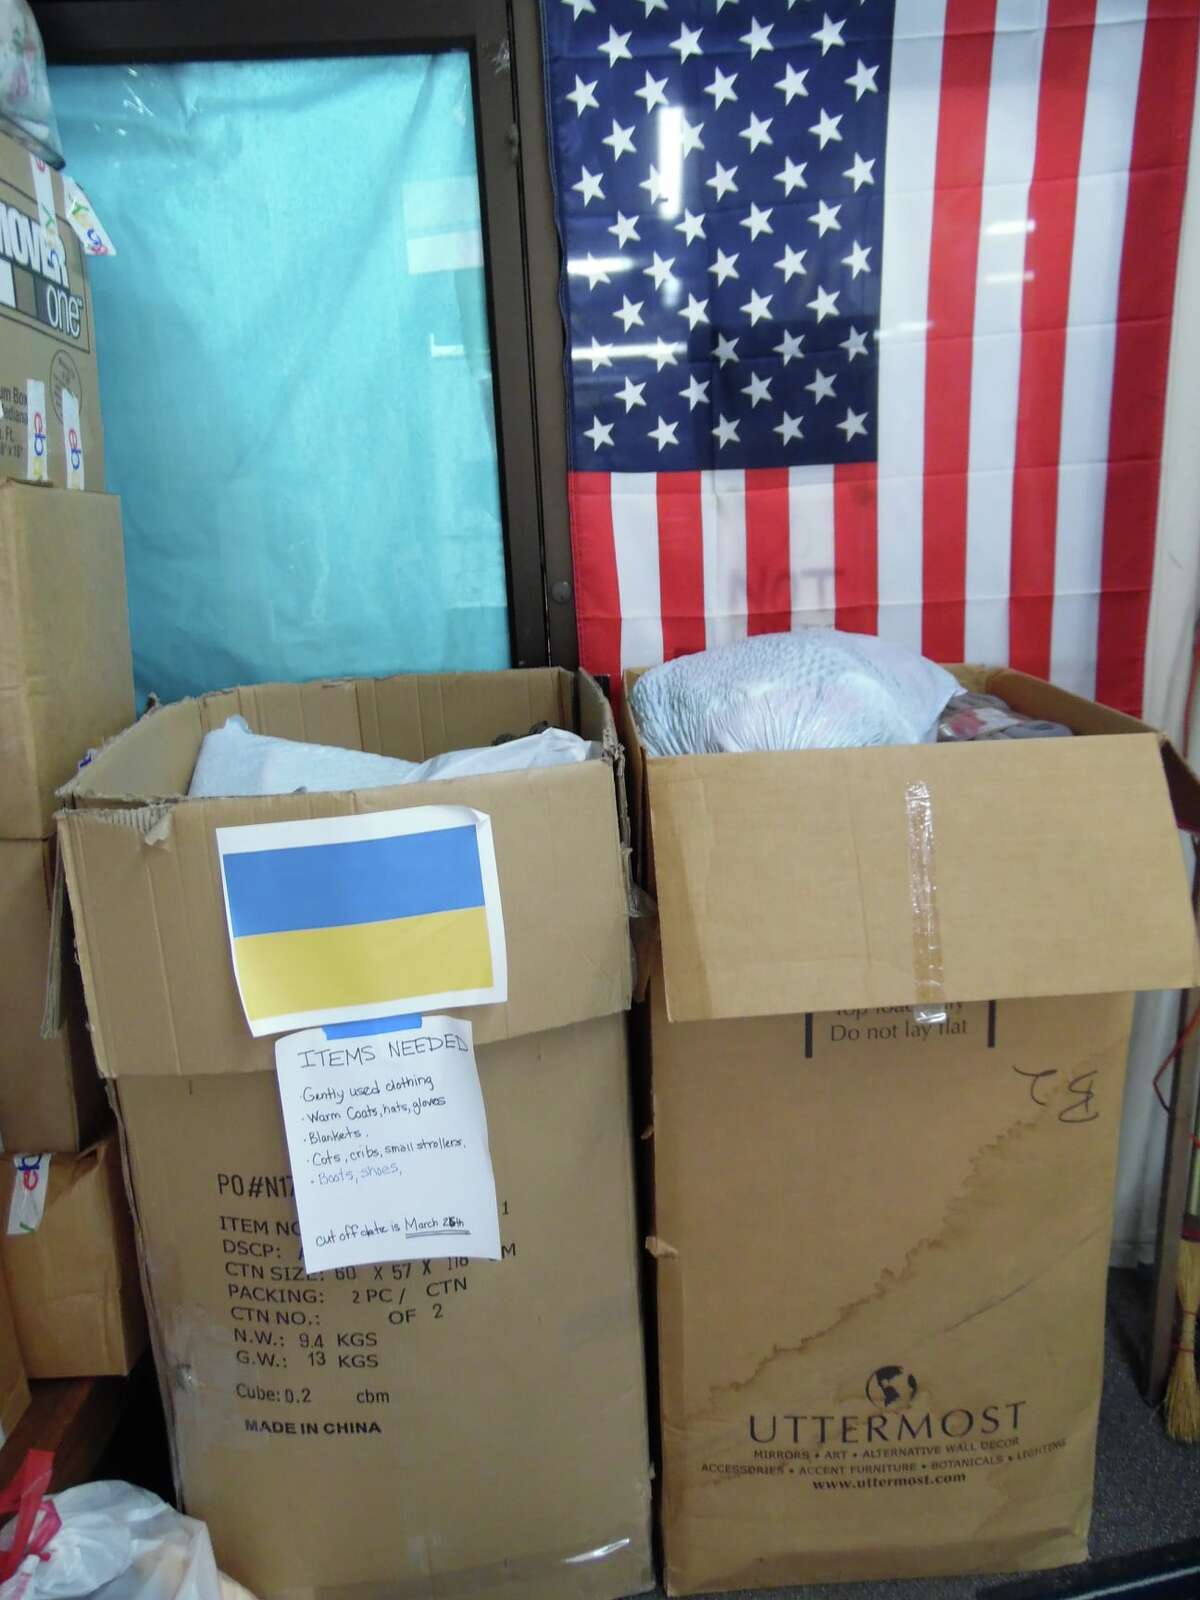 NU2U Resale Shop in Manistee is hosting a clothing donation drive for those in need in Ukraine until Friday.